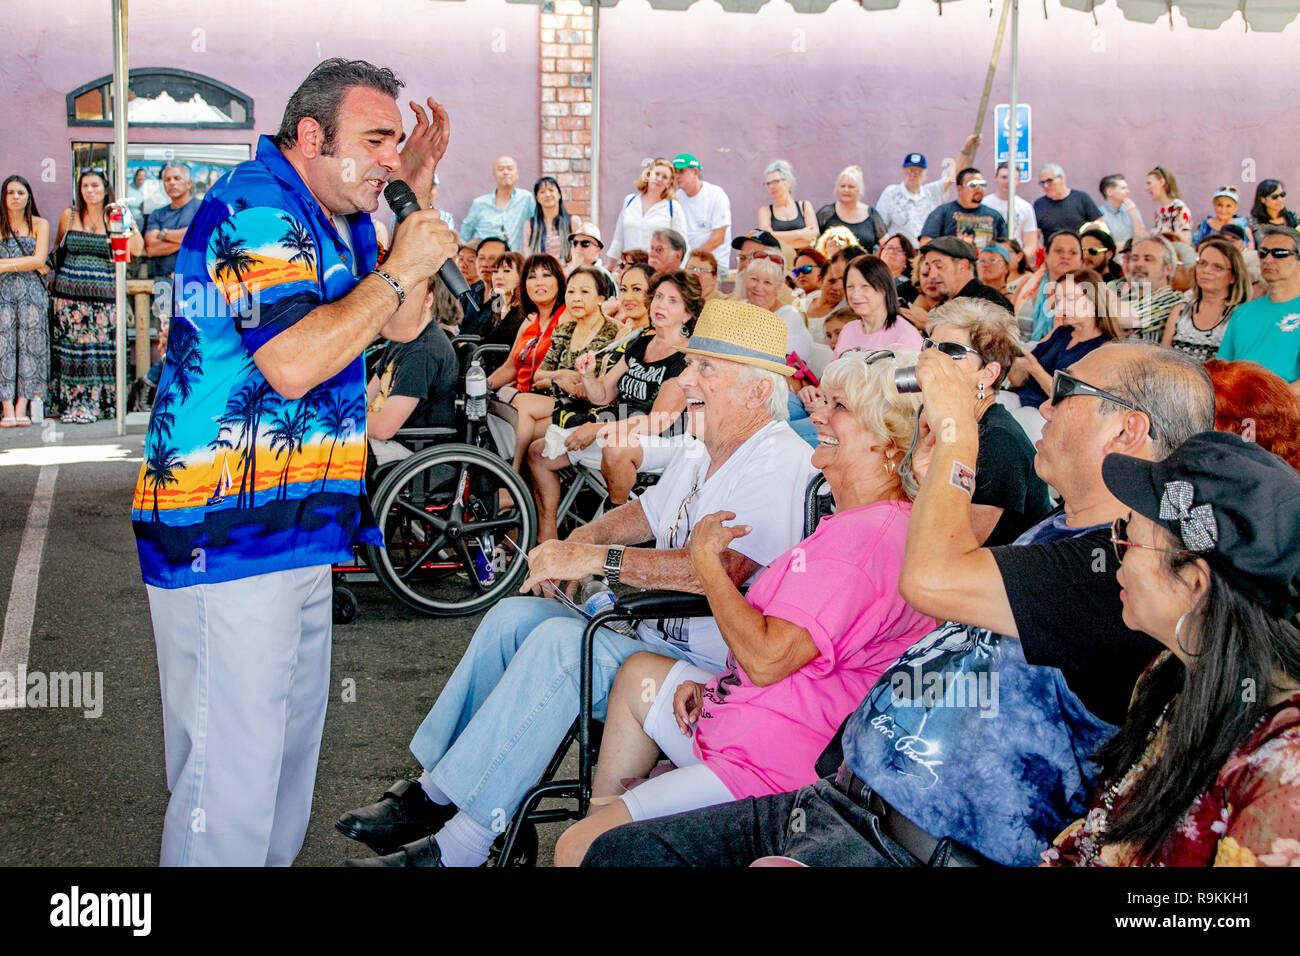 Performing rock 'n' roll classic songs, an enthusiastic singer charms young and old audience members at a music festival in Fullerton, CA. Stock Photo